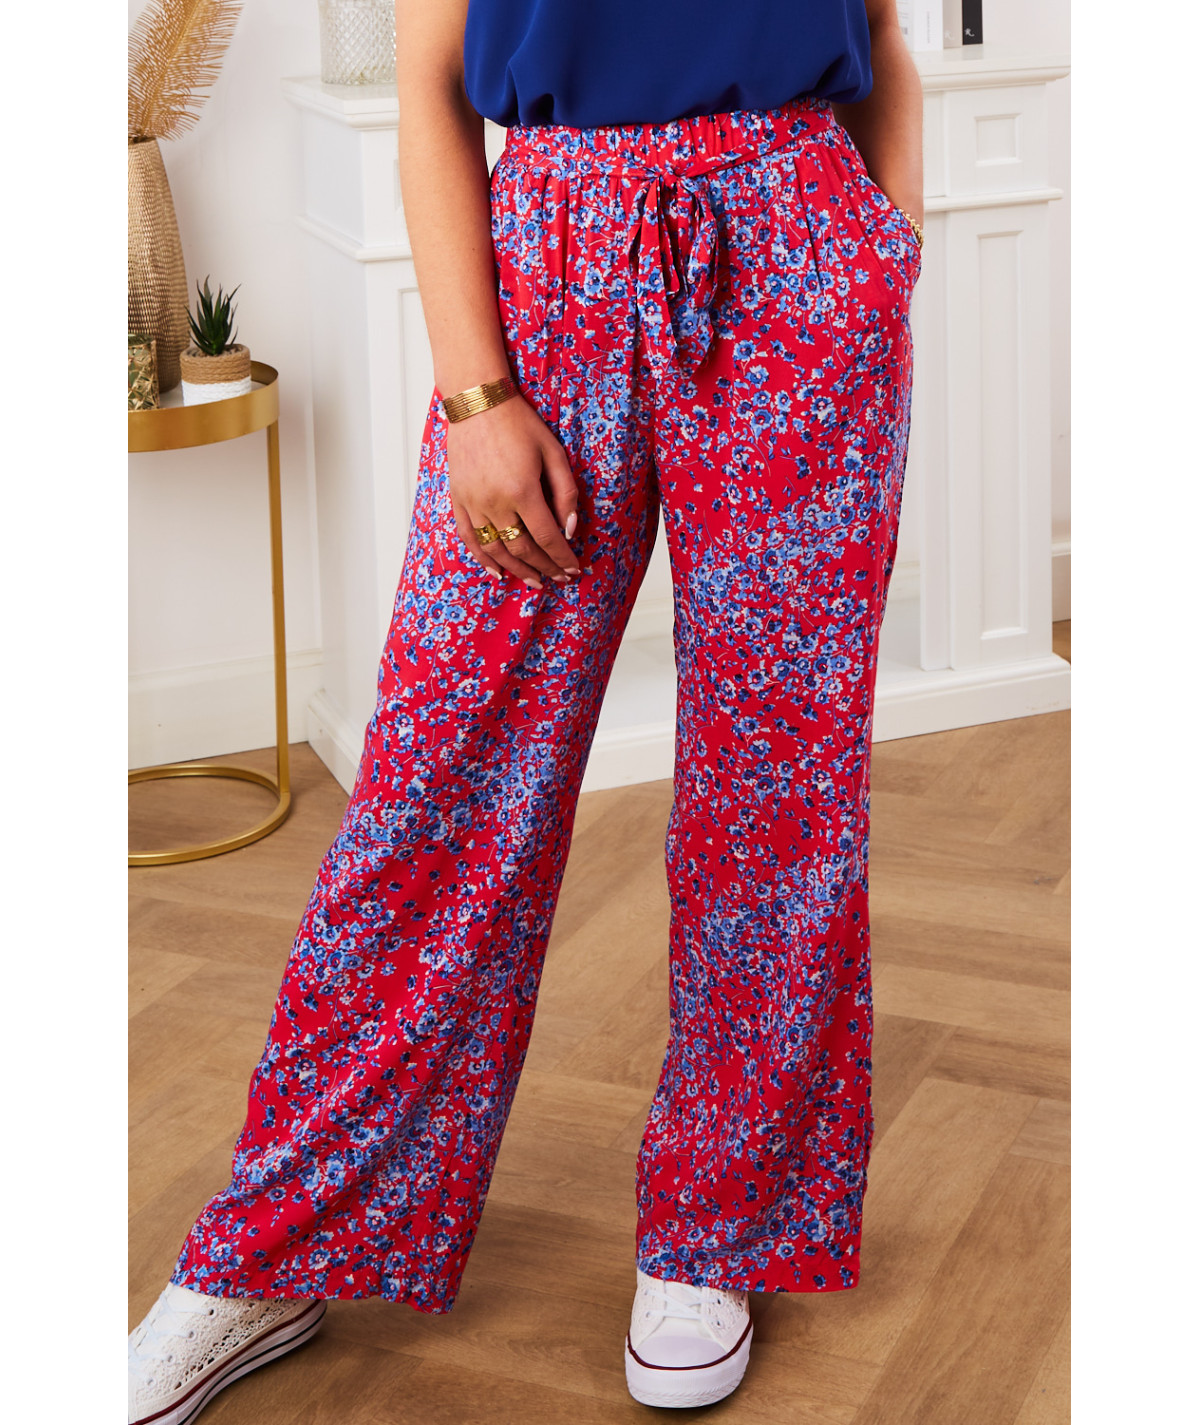 flowing red trousers with blue belt pattern